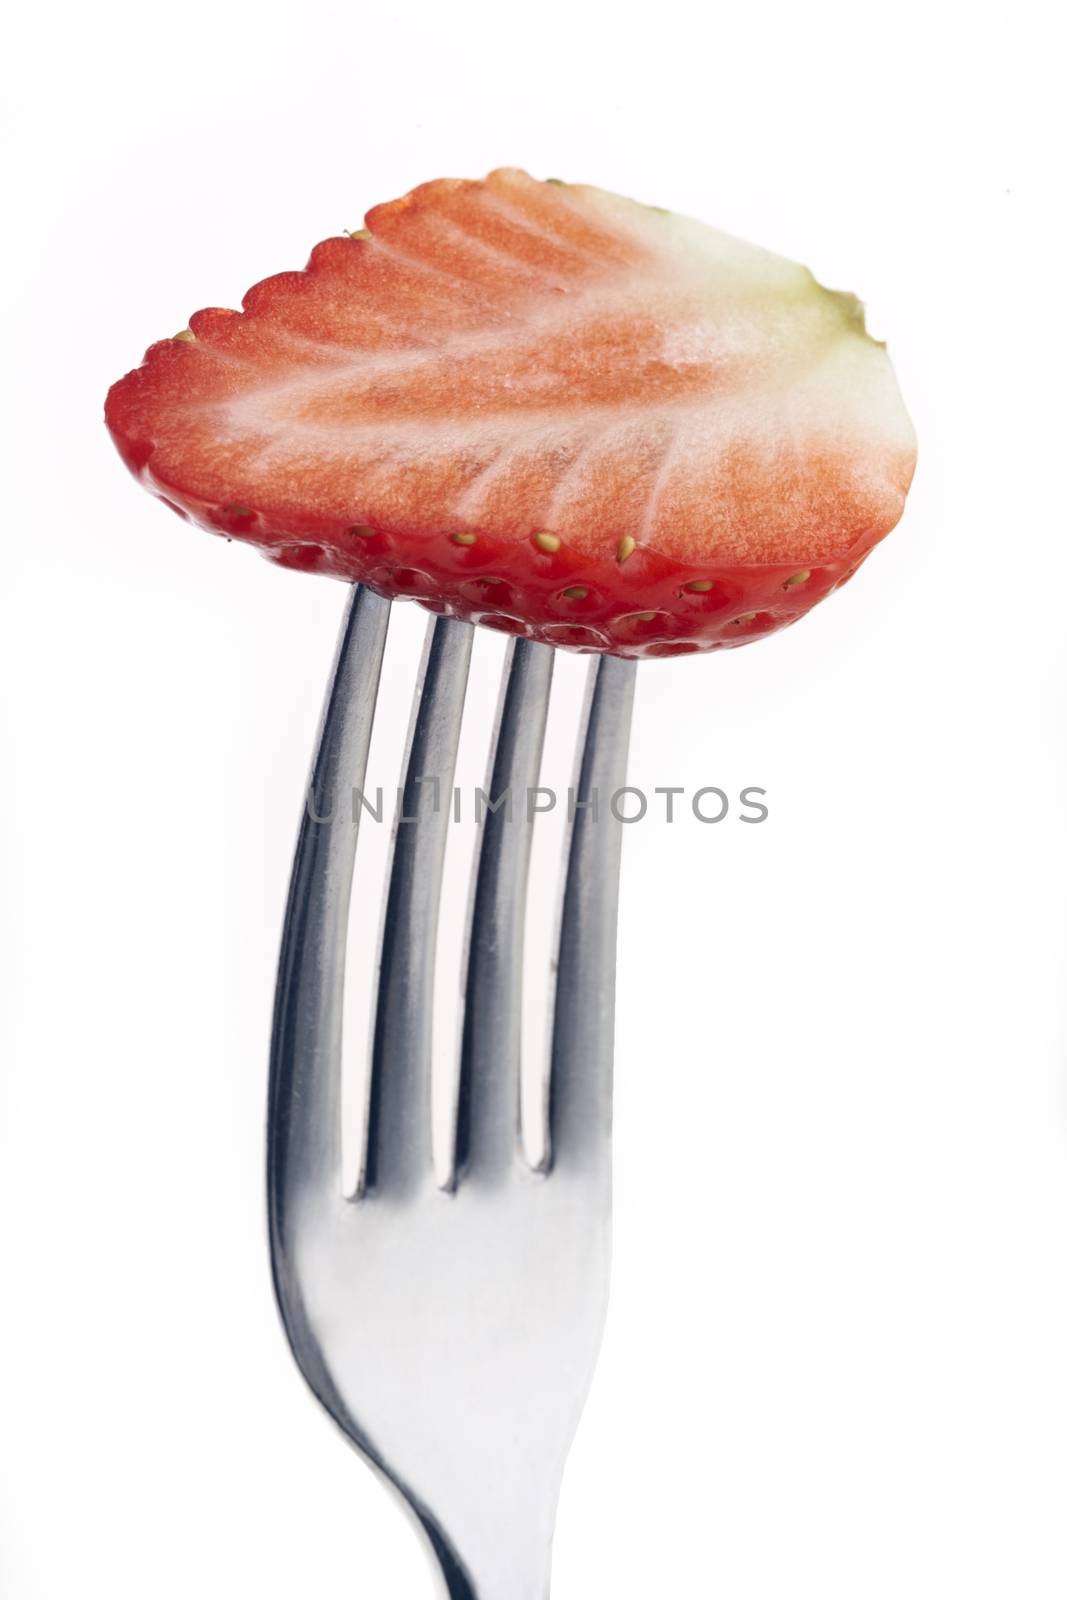 Strawberry on fork by gemphotography